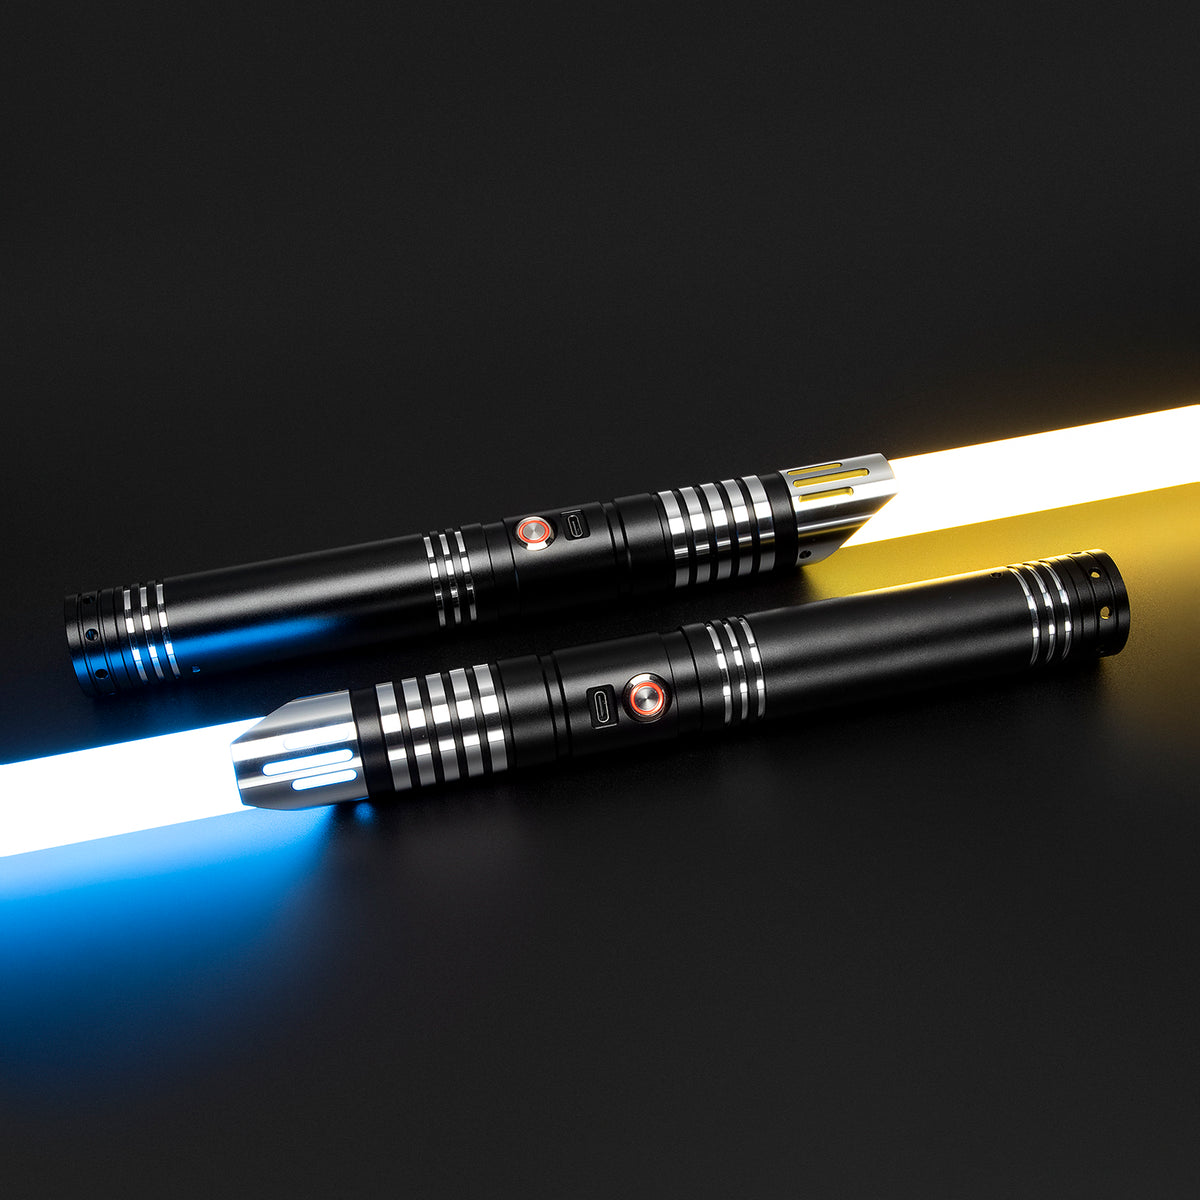 2 x SaberCustom heavy dueling lightsaber fx smooth swing 16 sound fonts infinite color changing 72CM blade C033 2 x Black